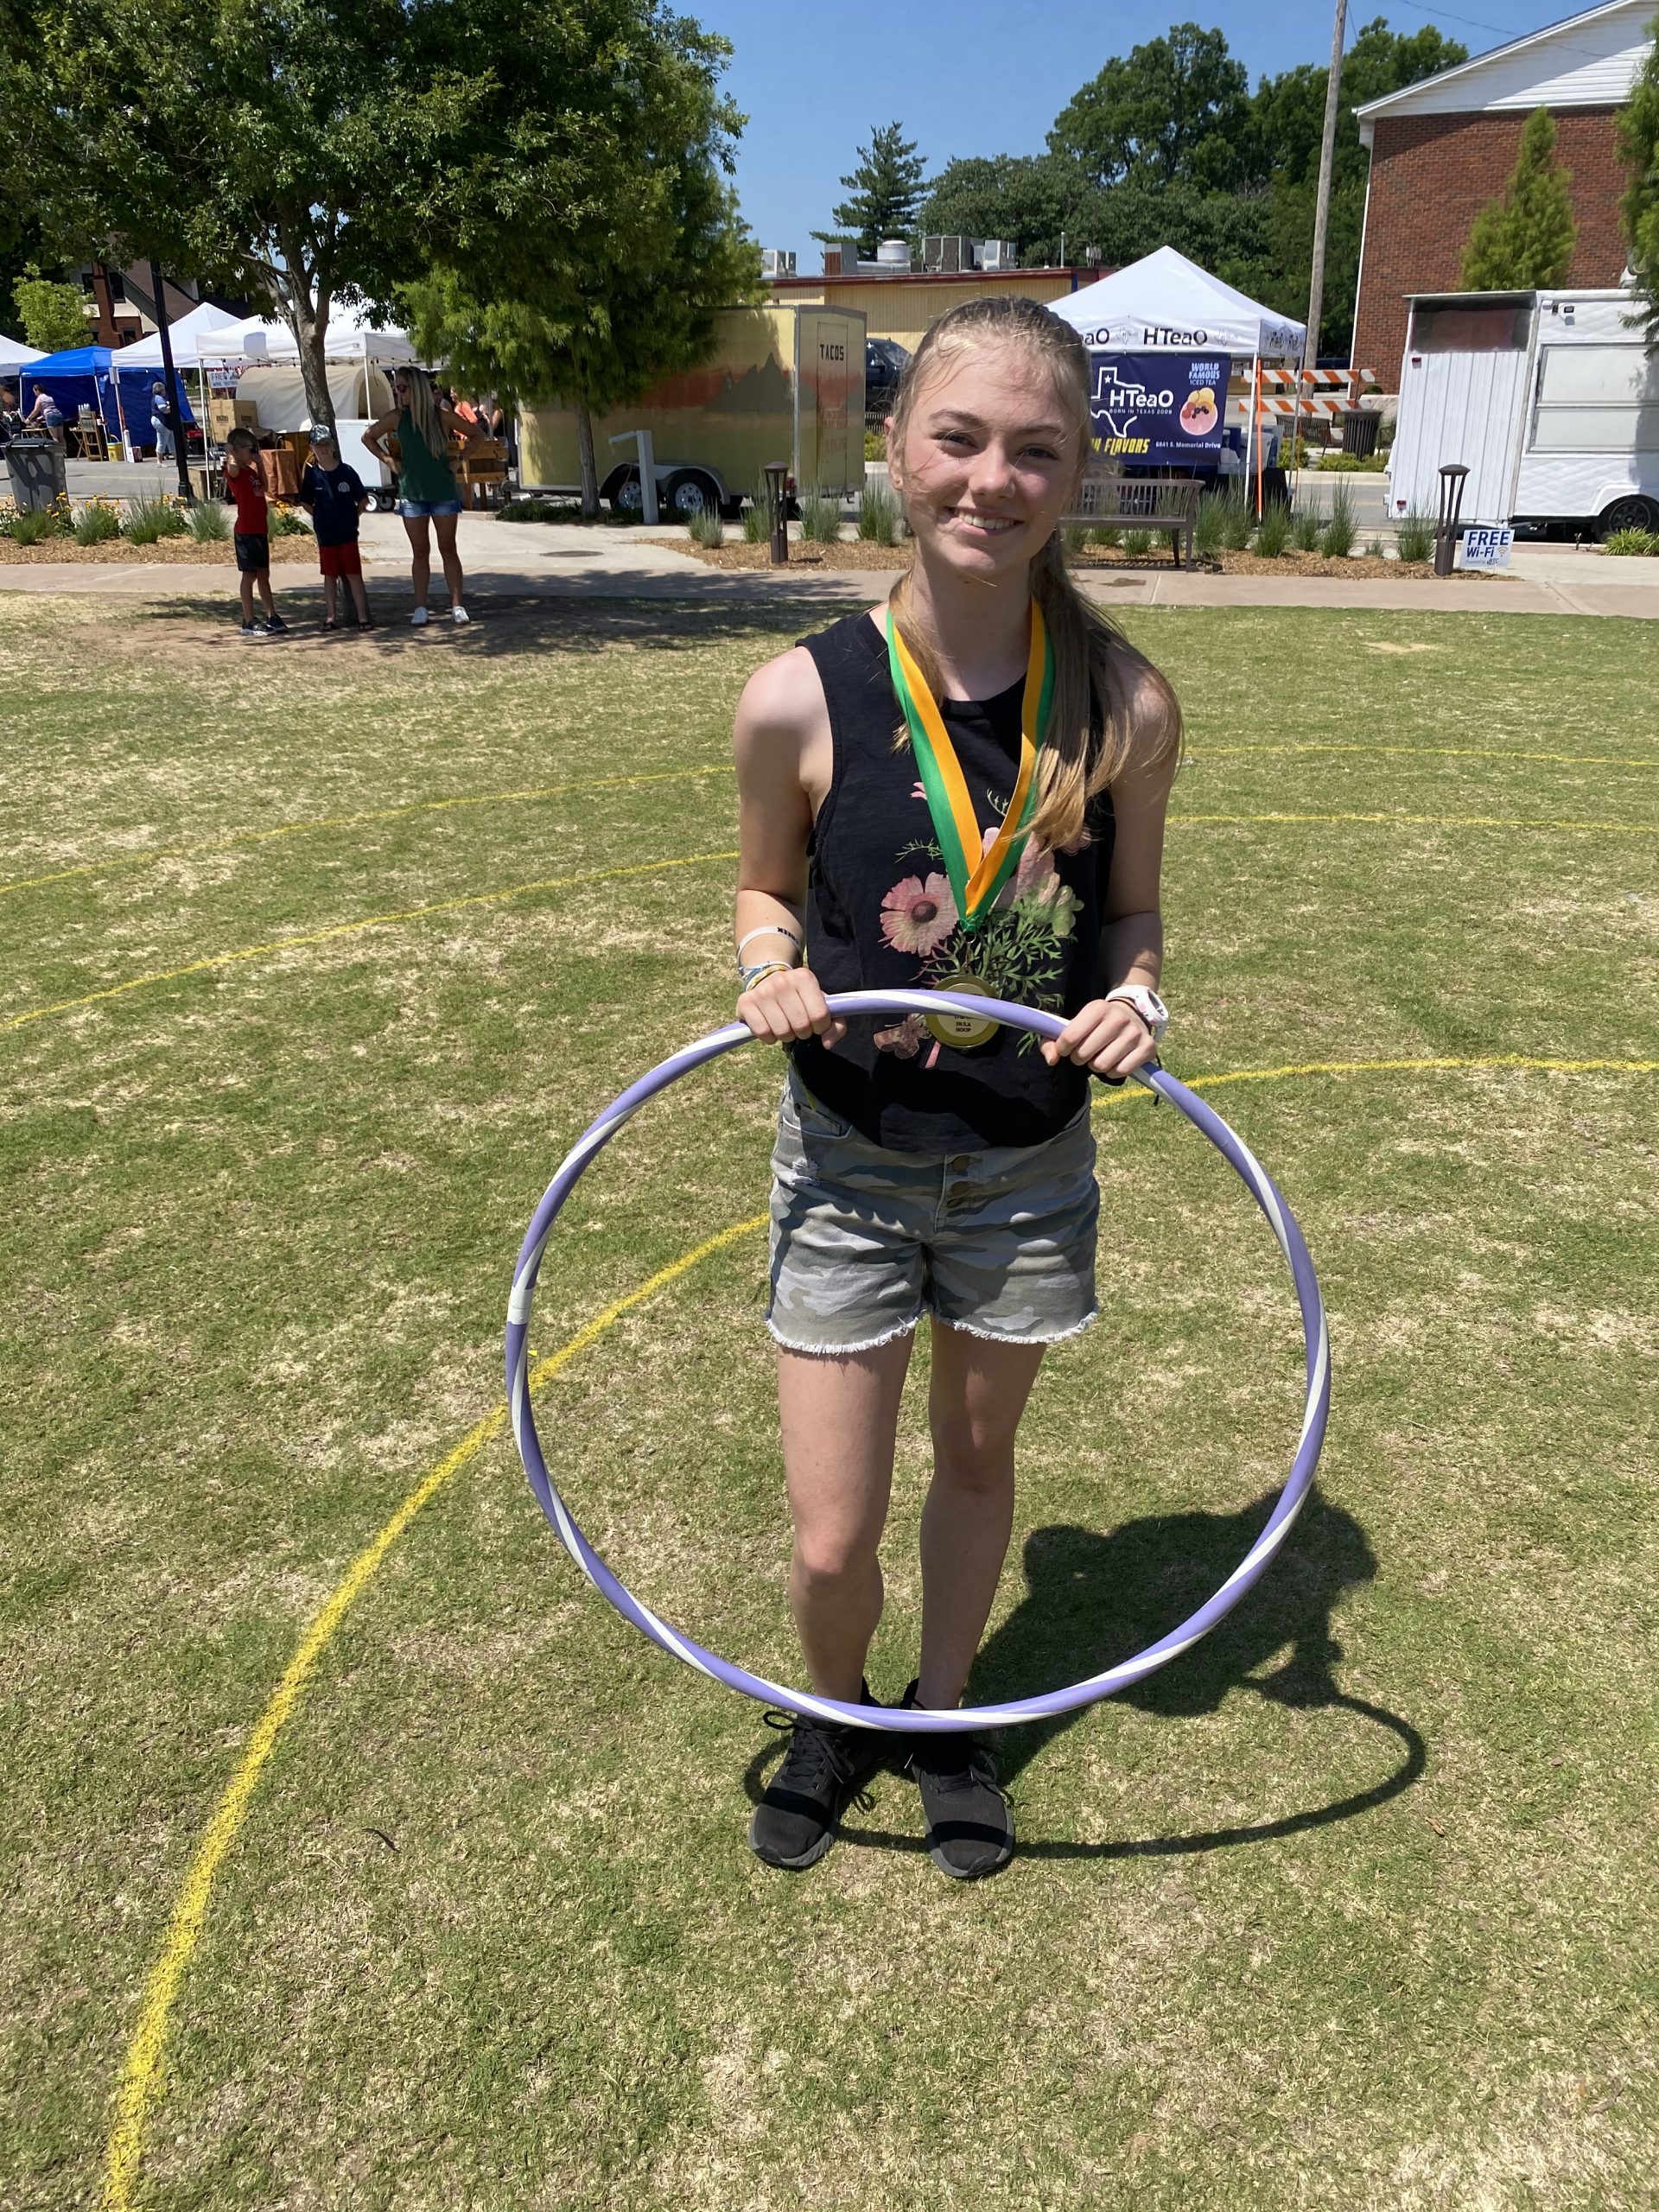 A girl holding a hula hoop in the grass.